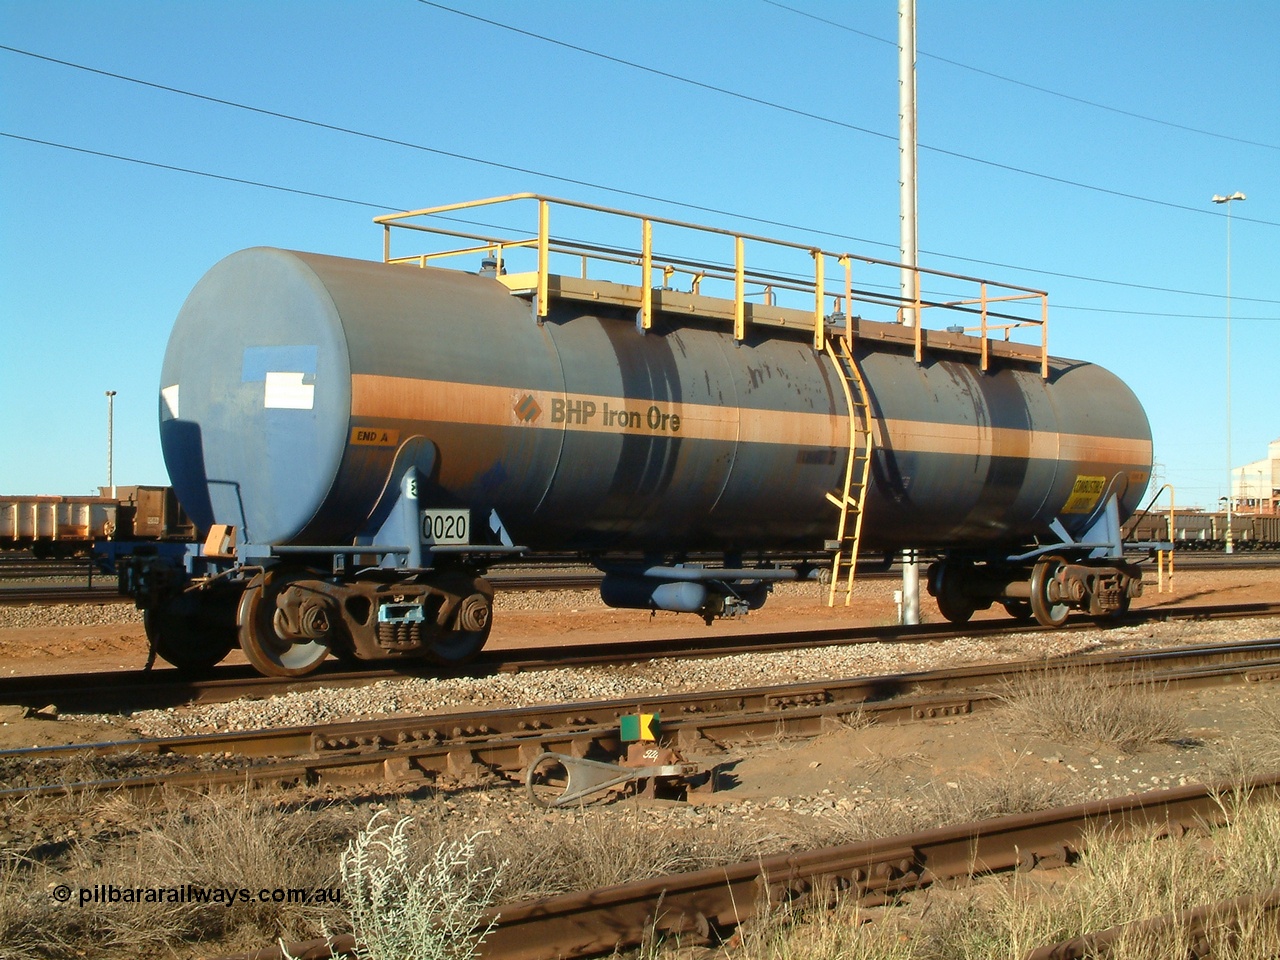 040627 080053
Nelson Point, fuel tank waggon 0020 82 kL capacity, built by Comeng NSW for BP as RTD 2, last of two such tanks, used on Mt Newman line, unsure when converted to 0020.
Keywords: Comeng-NSW;RTC2;BHP-tank-waggon;